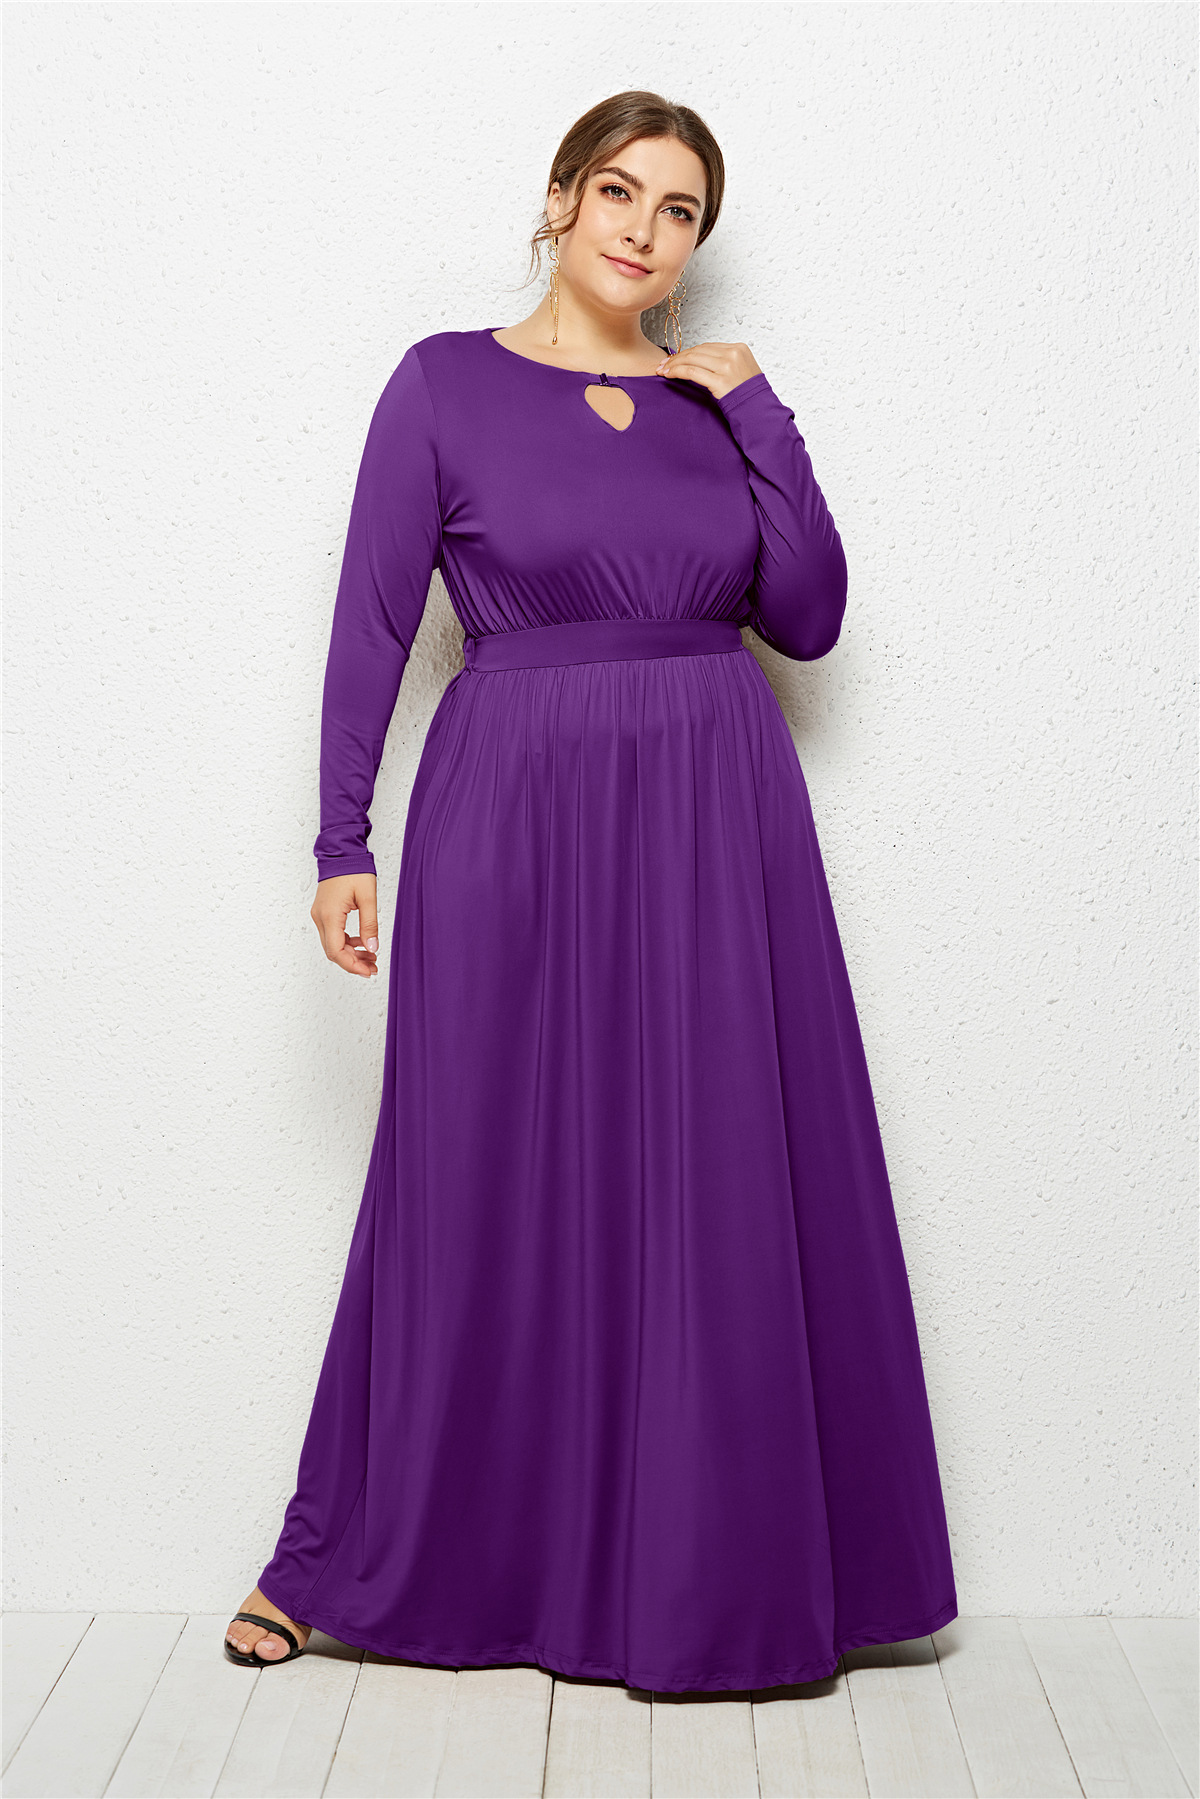 Plus Size Women Long Sleeve Maxi Cocktail Dresses Evening Party Formal ...